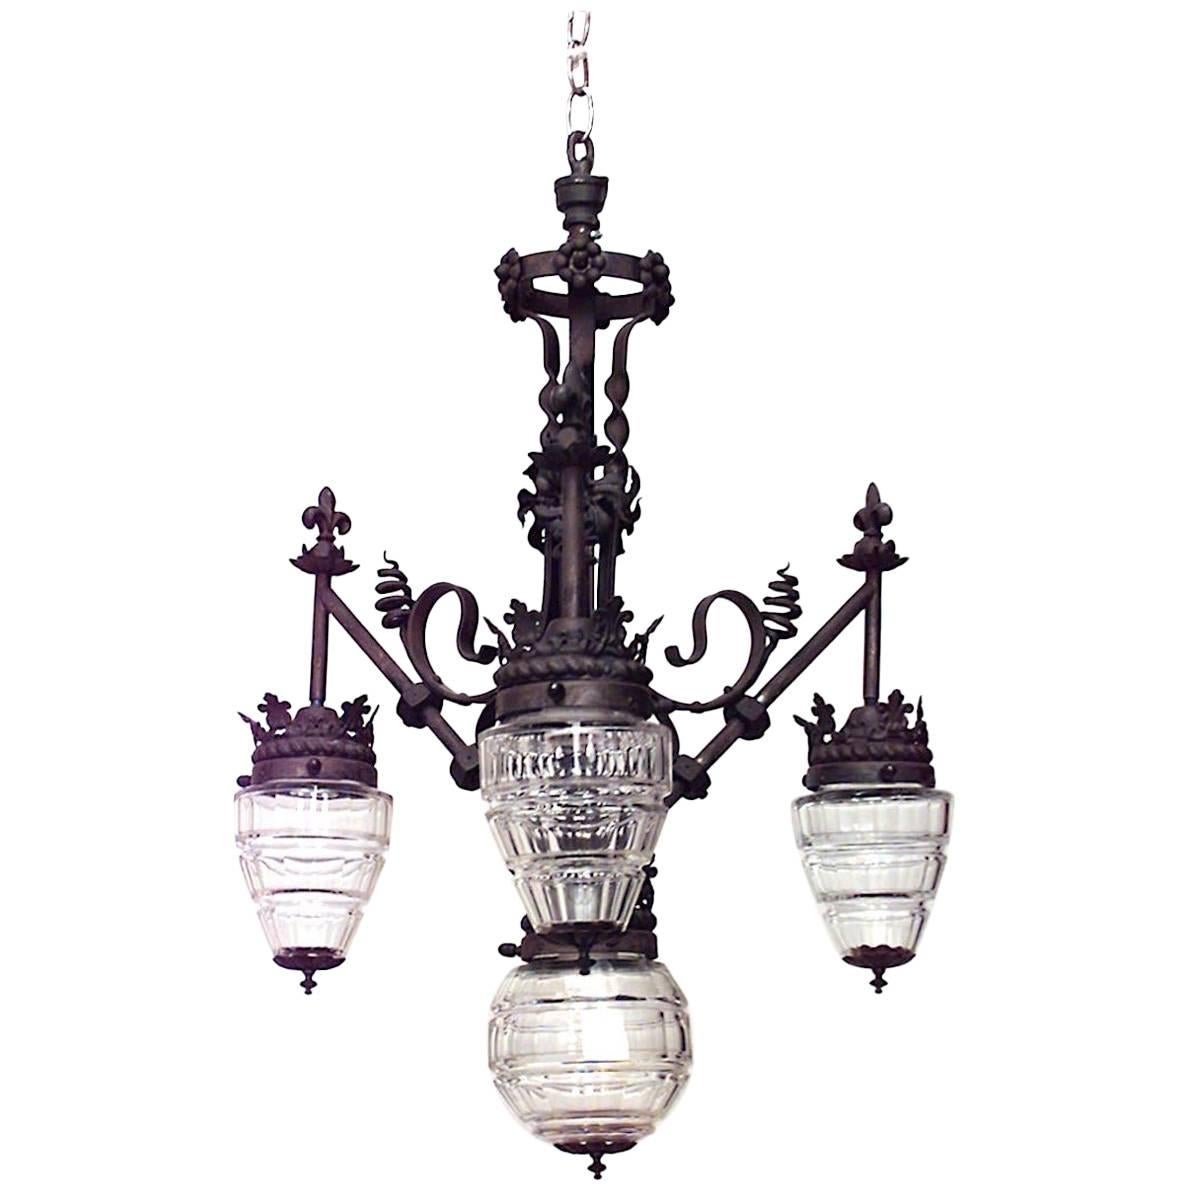 French Provincial Style Wrought Iron and Glass Floral Chandelier